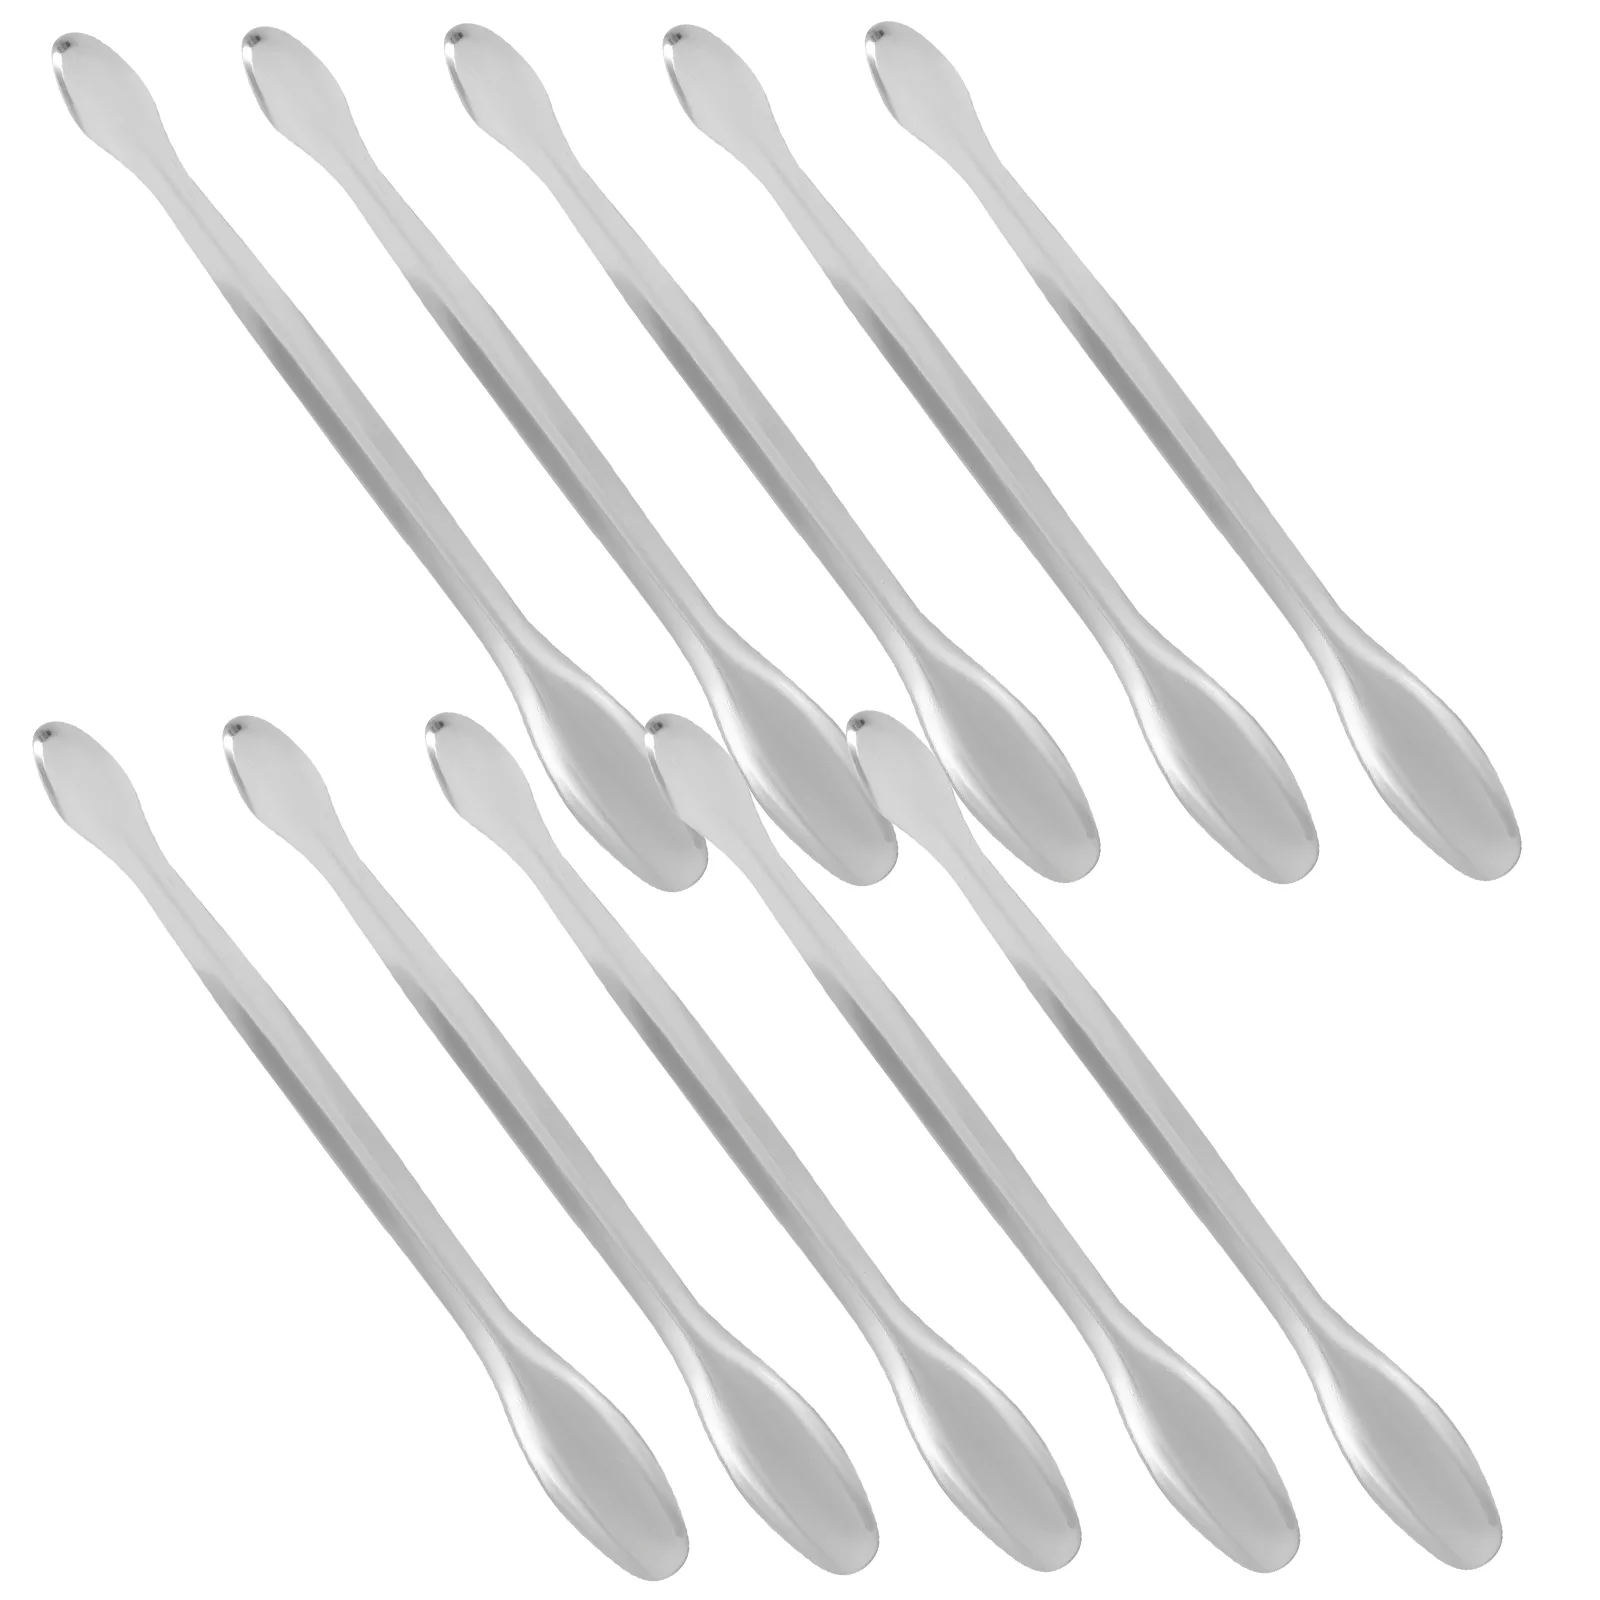 

10 Pcs Mini Scoop Mixing Spoon Spoons Laboratory Medicine Stirring Stainless Steel Metal Experiment Scoops Double-head